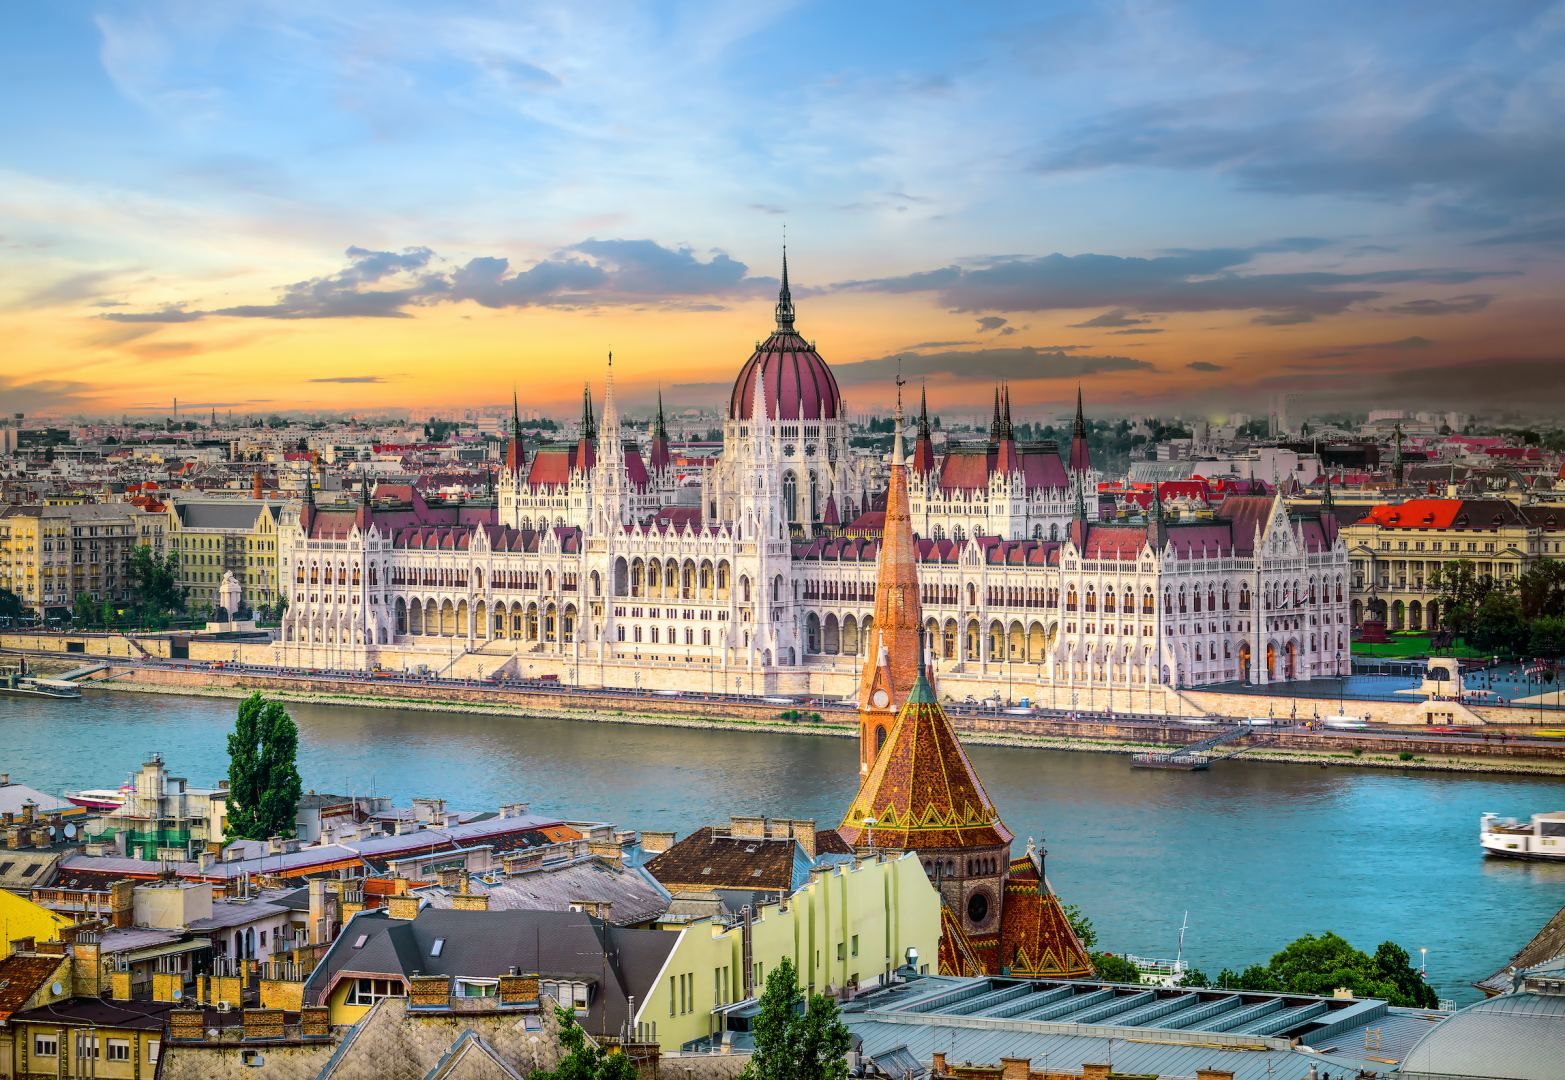 Hungary reports strong tourism rebound in 2022